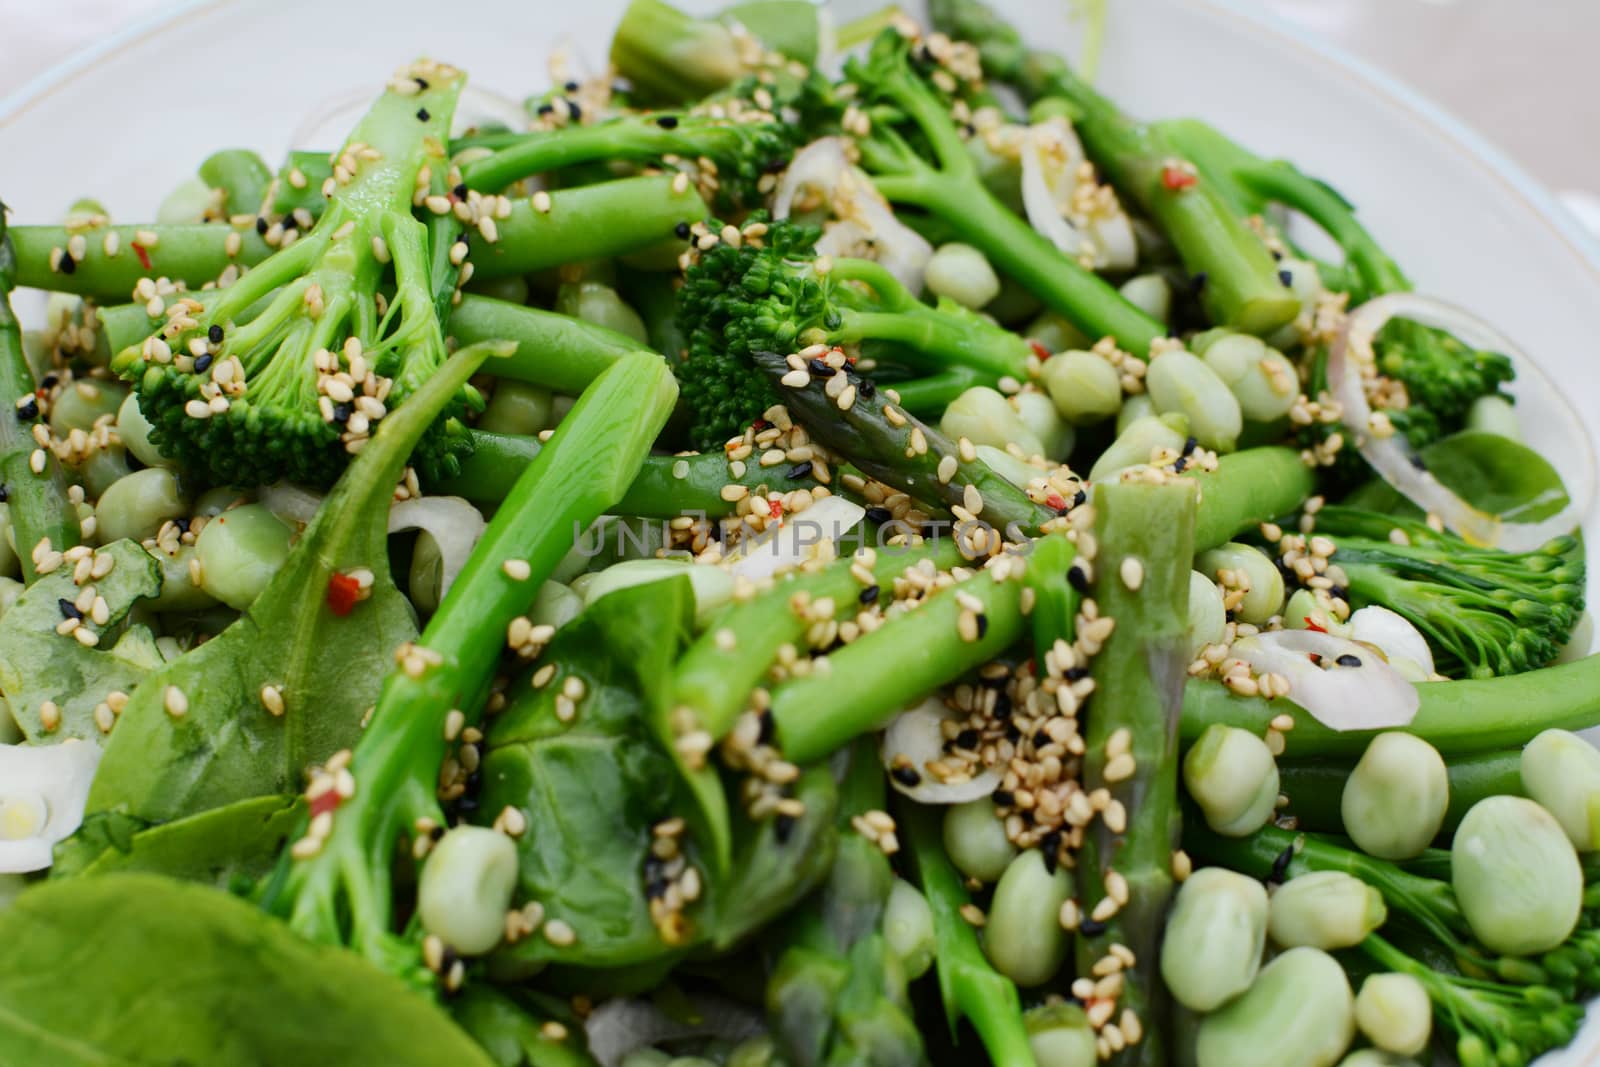 Tasty spring salad of baby broccoli, asparagus, broad beans, spinach leaves and shallot dressed with sesame and nigella seeds